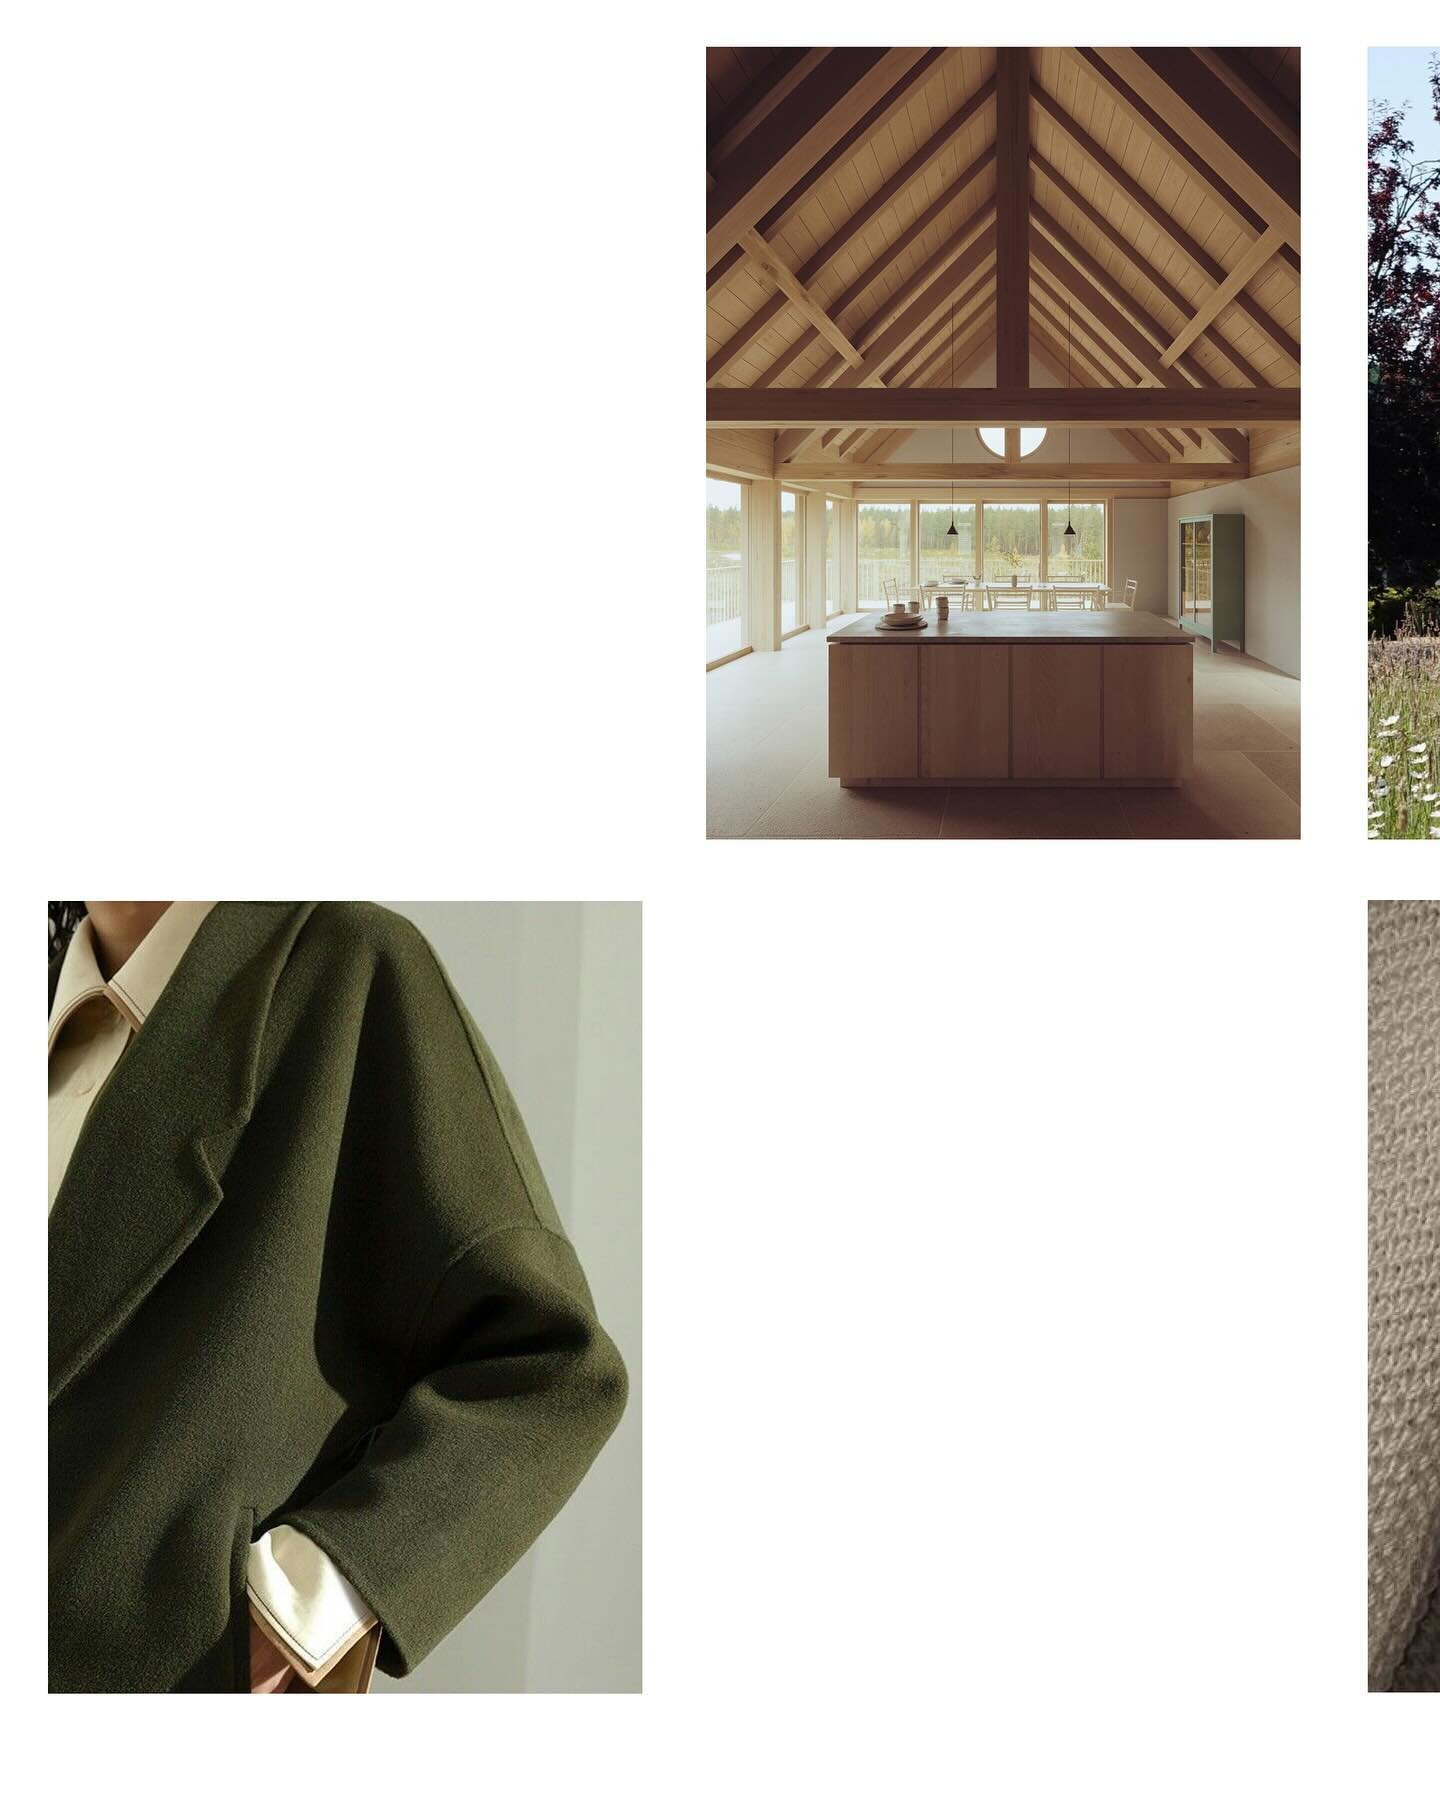 #moodboardmonday for a really lovely project I&rsquo;m working on this week